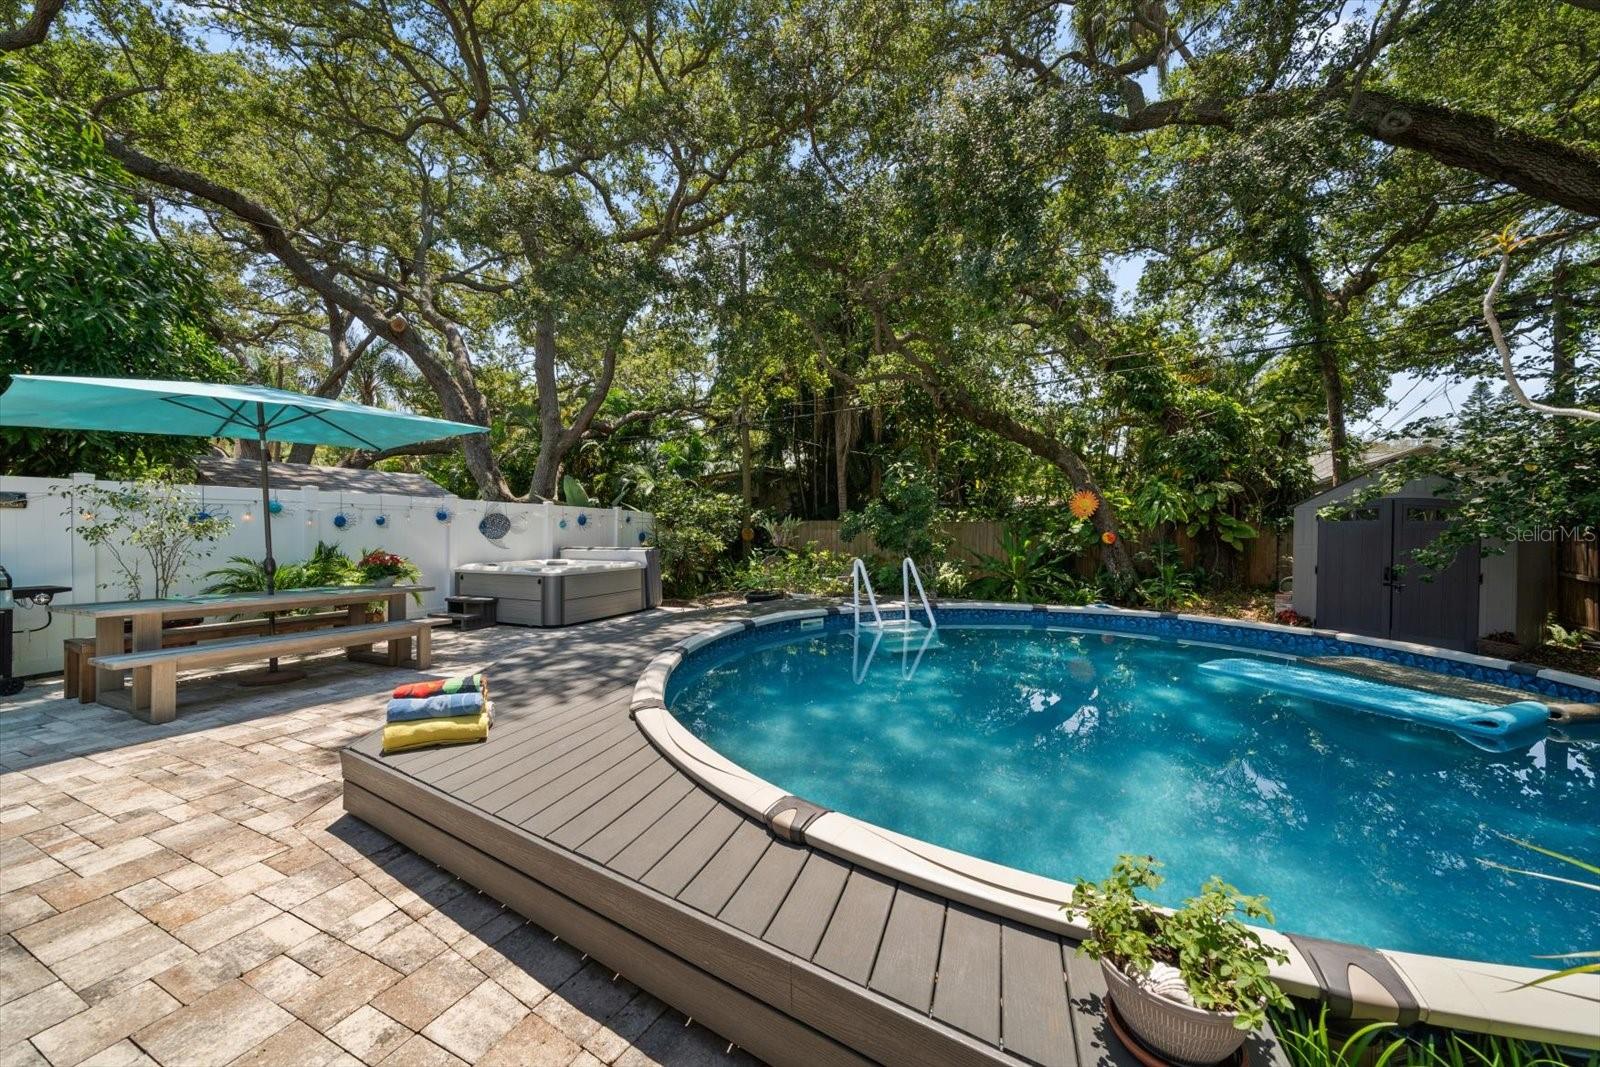 Key West Pool (2021) surrounded with Trex decking - Pools come with new solar blanket pool cover and all pool equipment